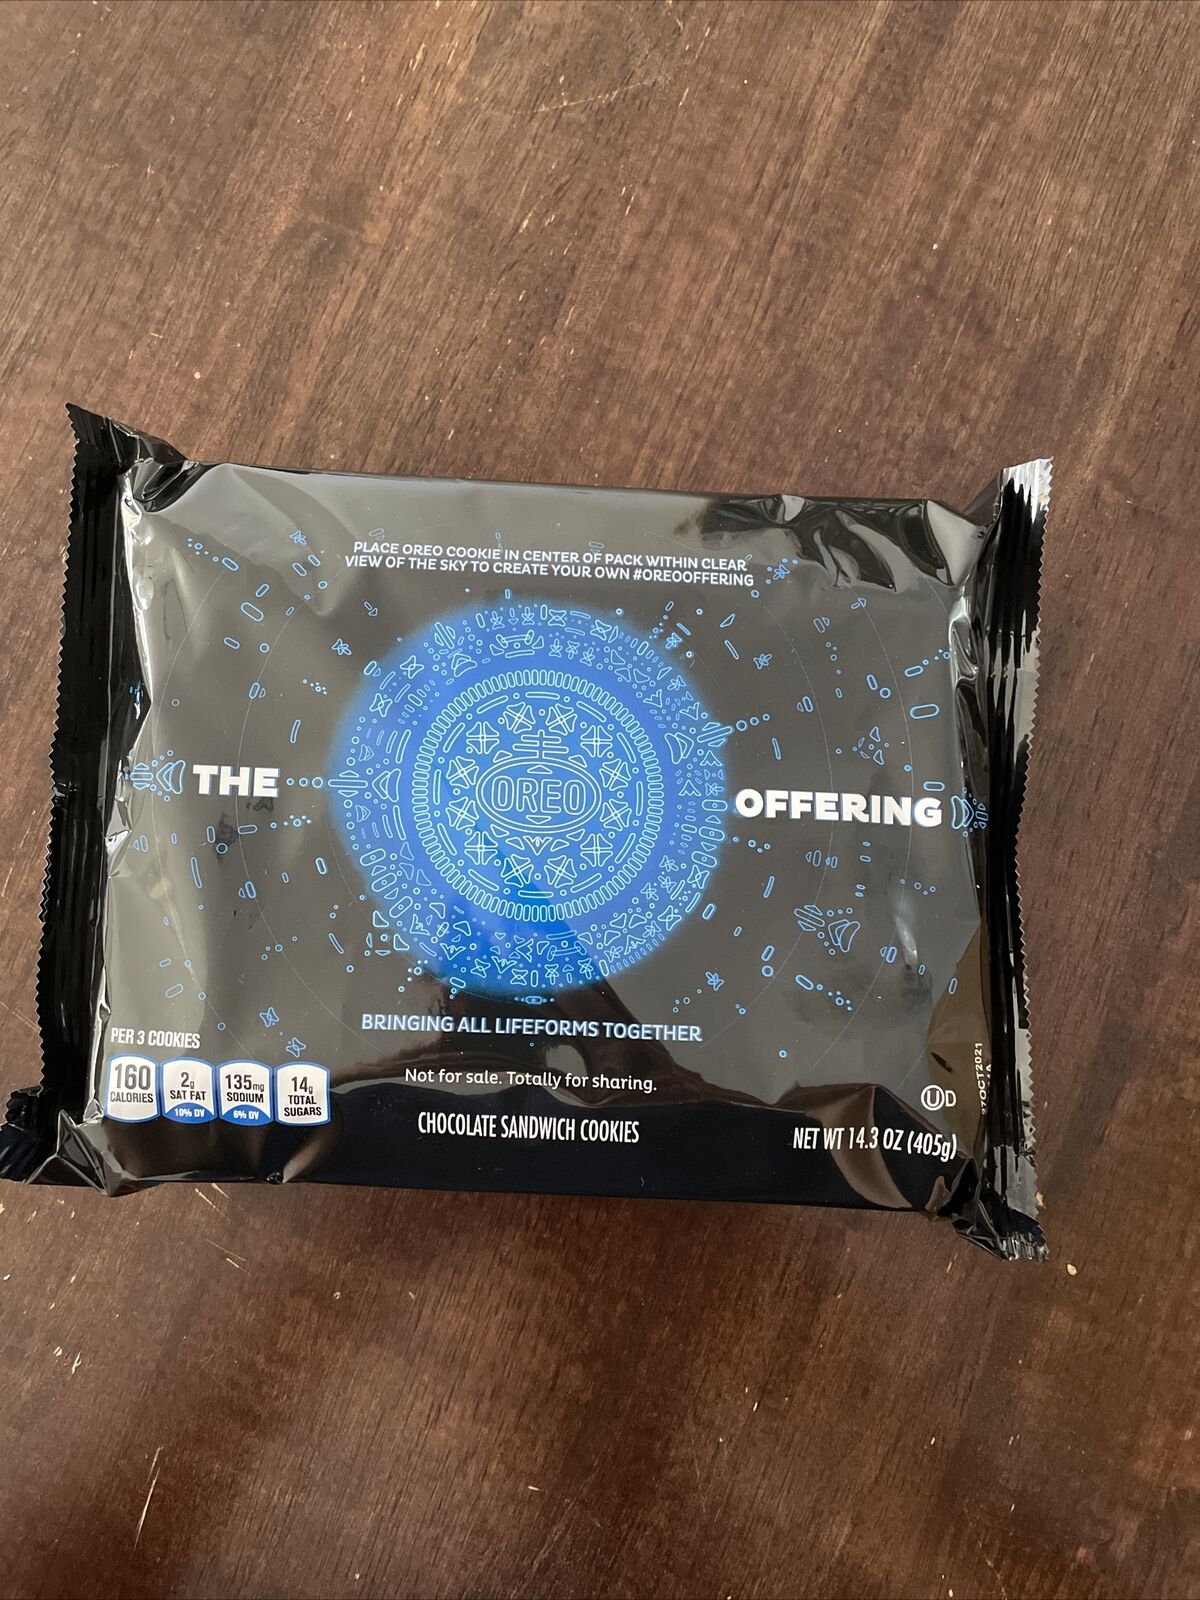 Oreo The Offering Limited Edition of 3000 - IN HAND BRAND NEW